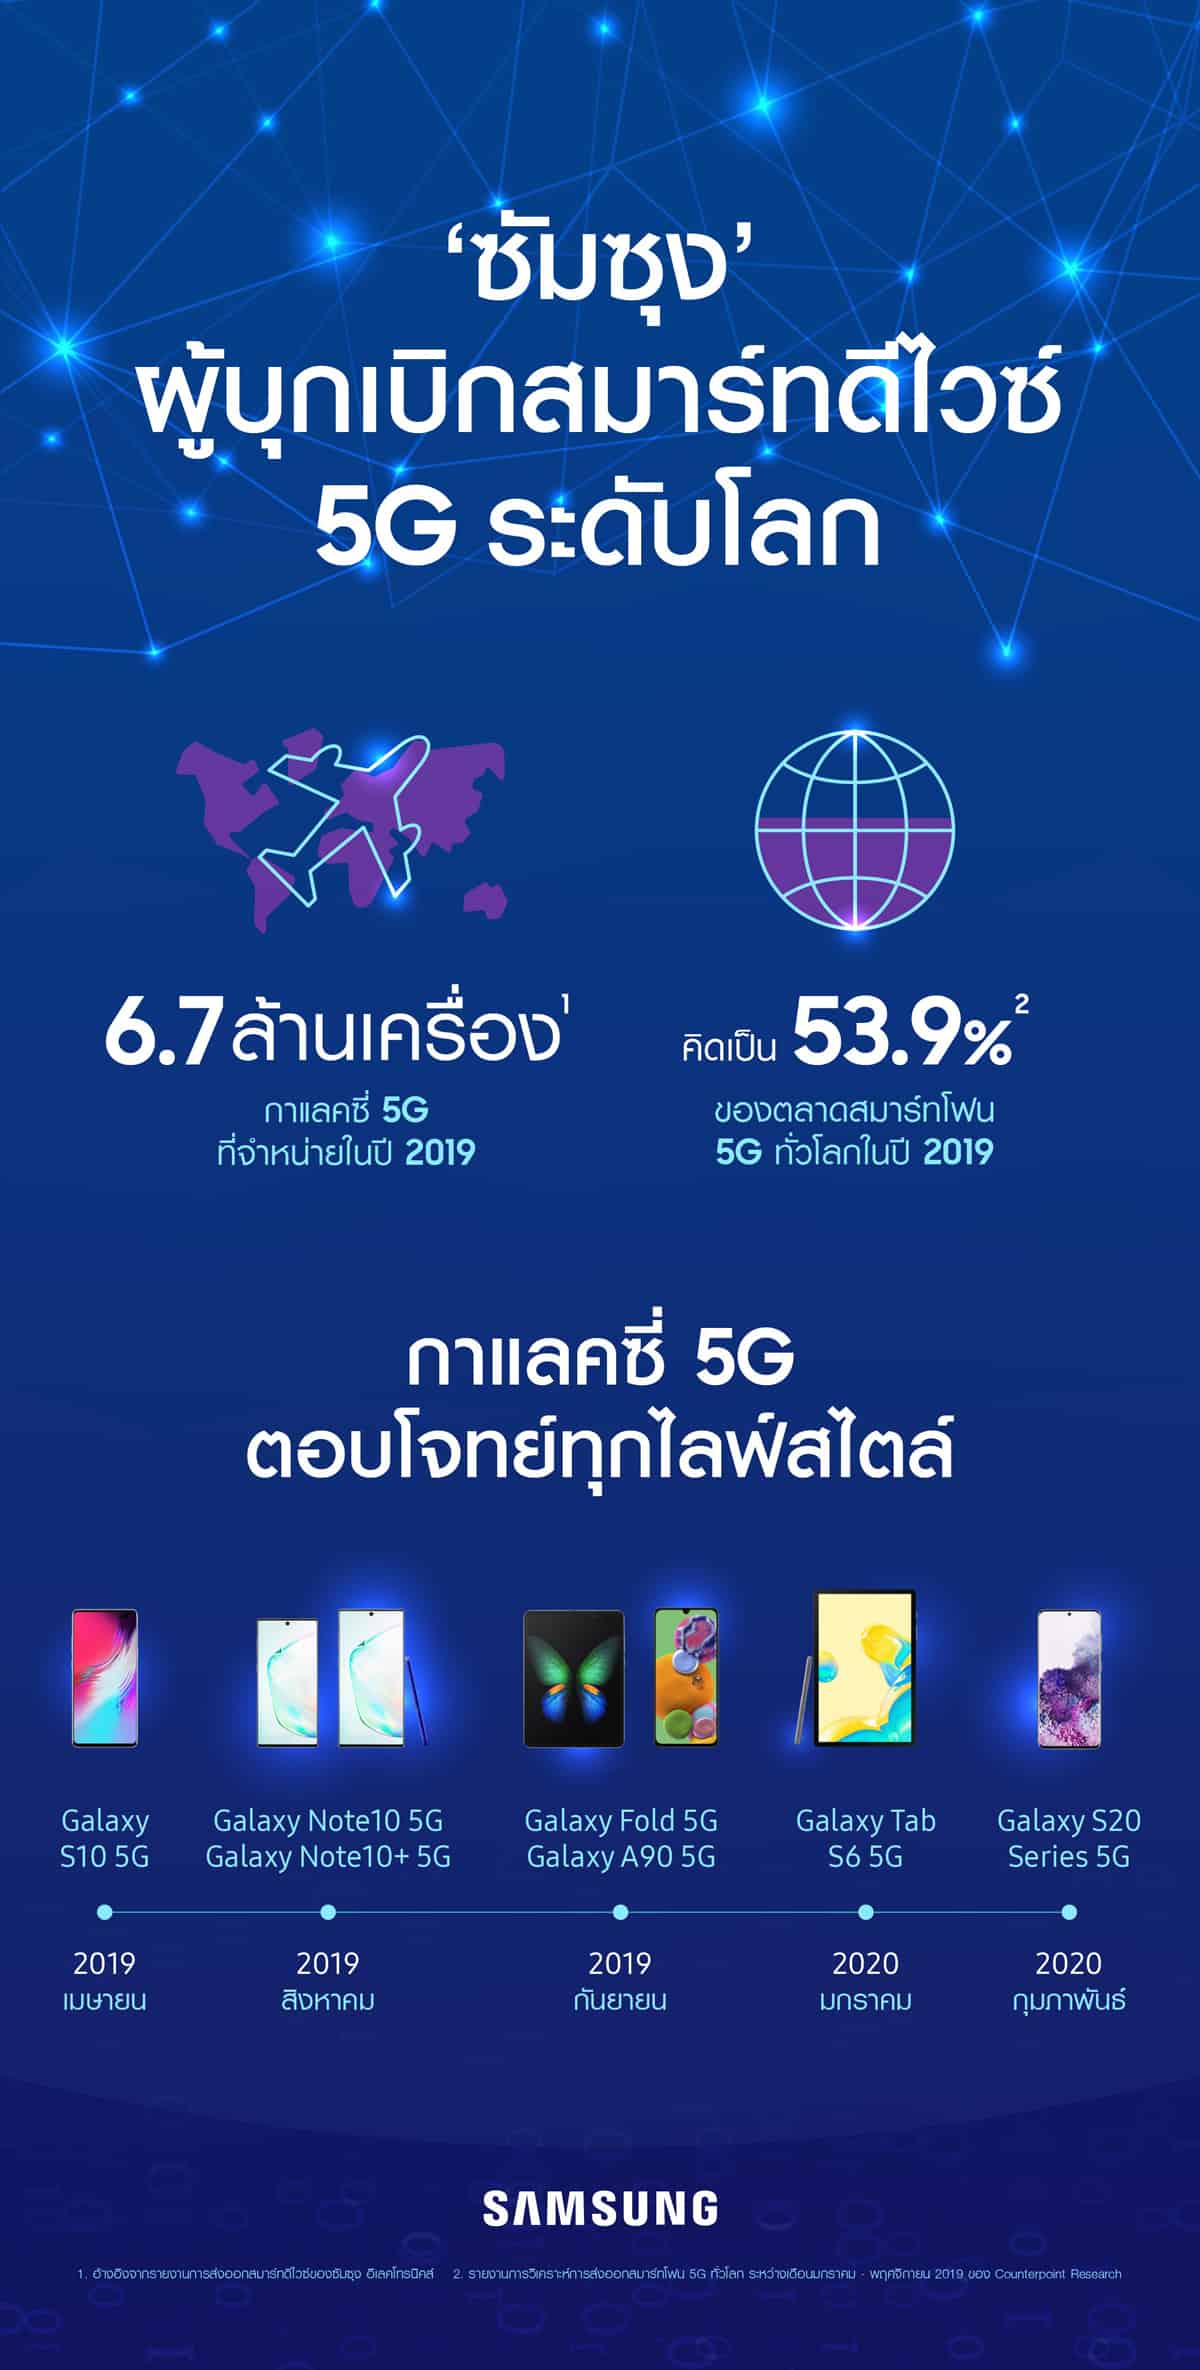 https://www.techoffside.com/wp-content/uploads/2020/05/Galaxy-5G-Year-in-Review_TH-01.jpg